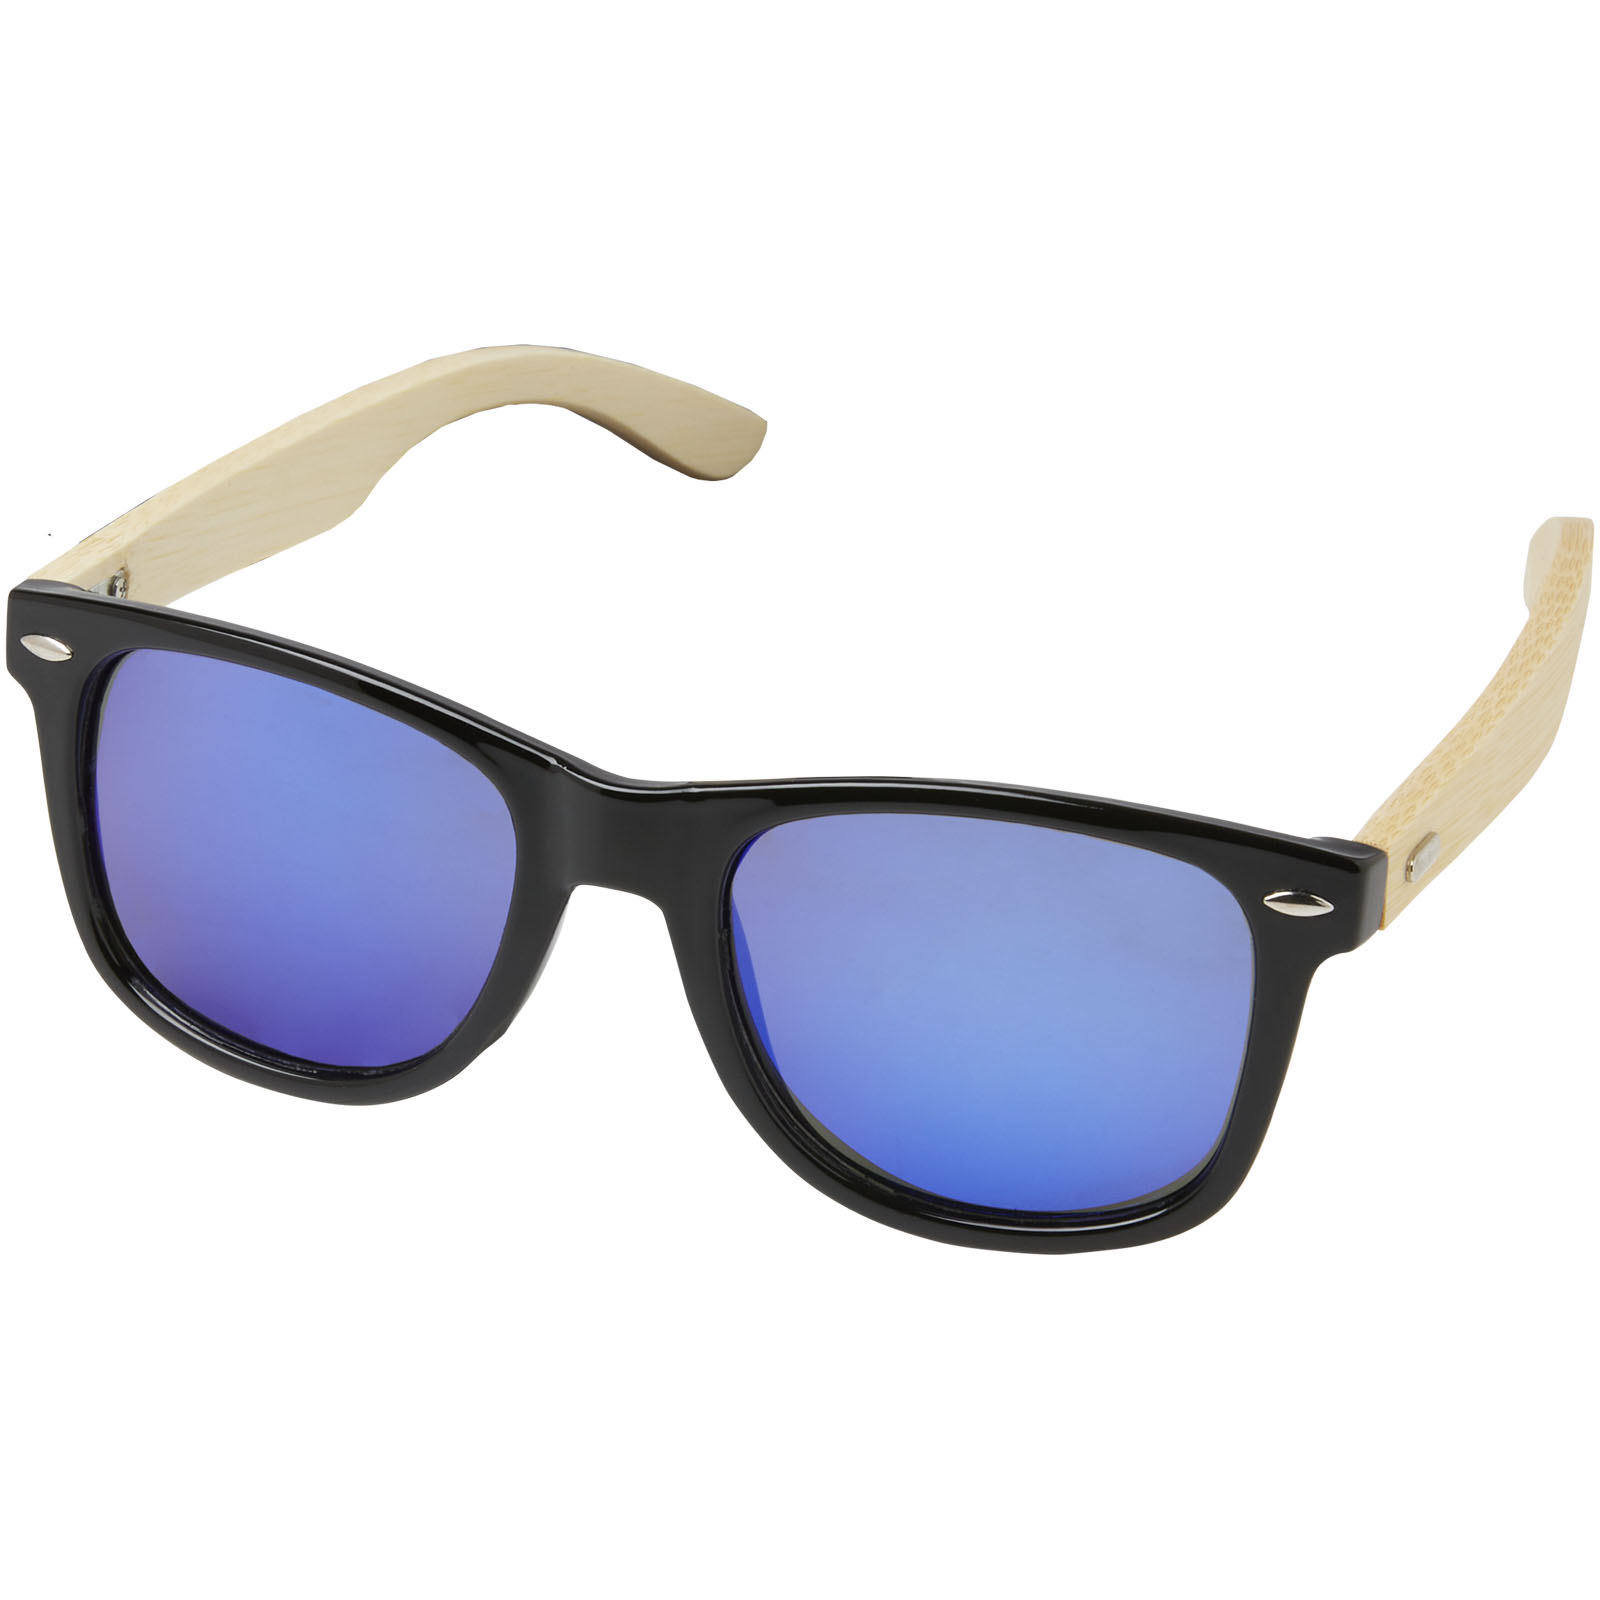 Advertising Sunglasses - Taiyō rPET/bamboo mirrored polarized sunglasses in gift box - 0